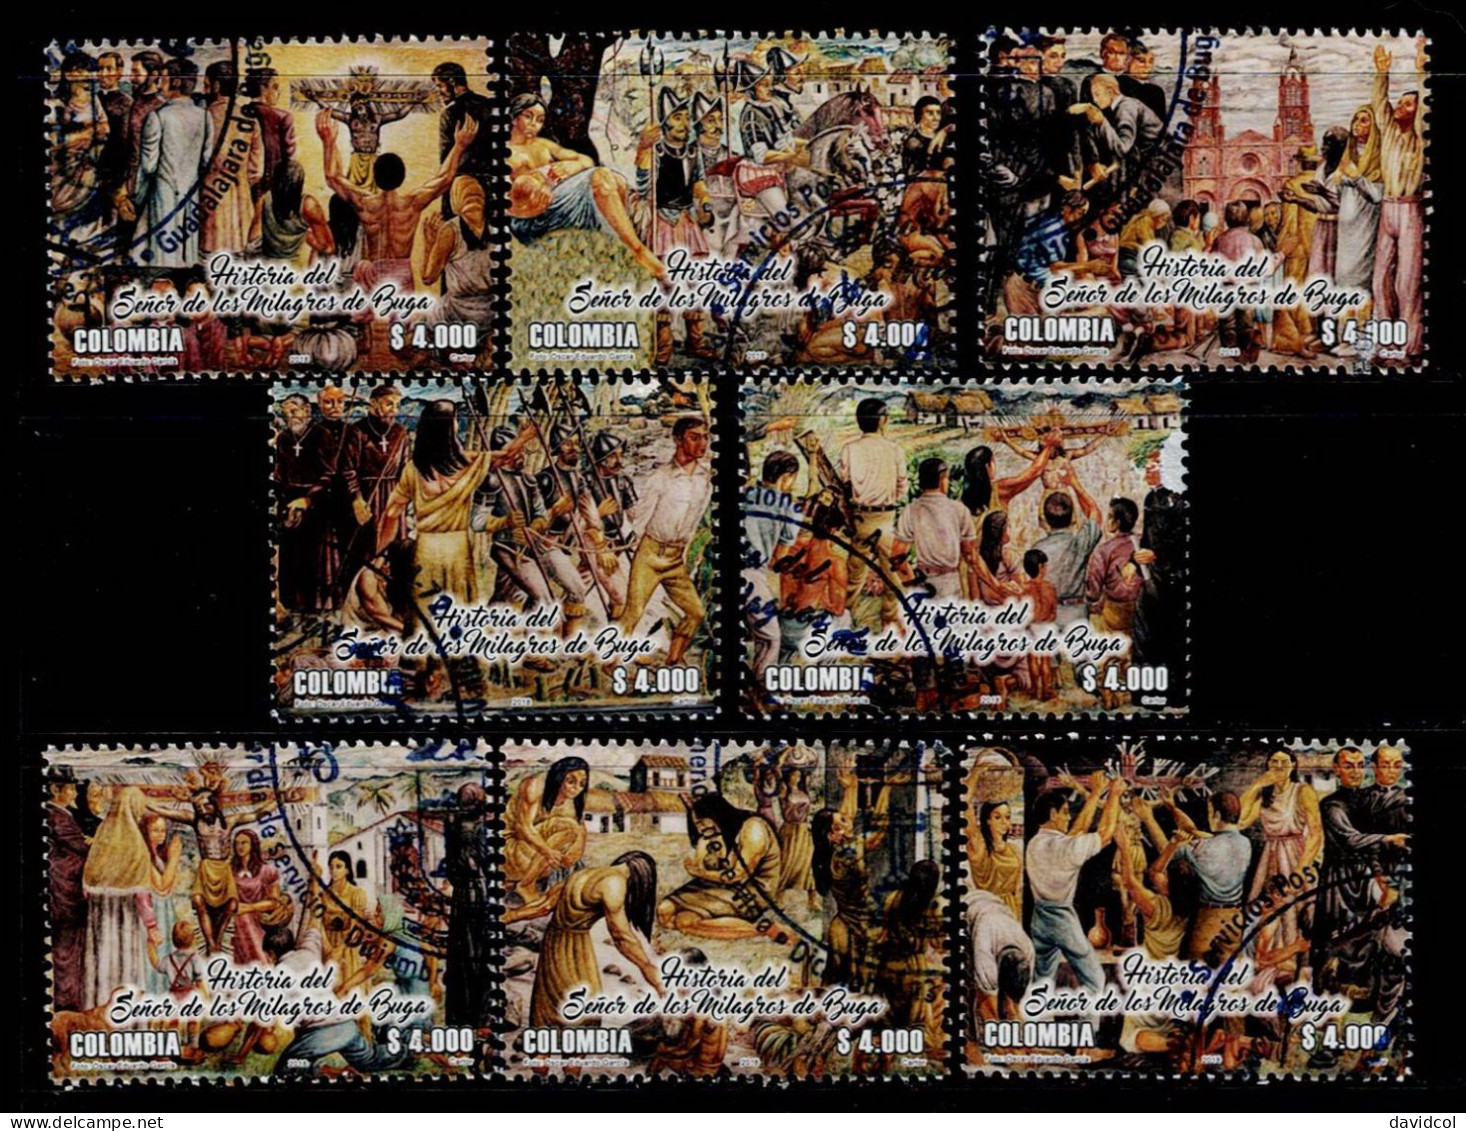 0066H-KOLUMBIEN - 2018 – USED COMPLETE SET – HISTORY OF MIRACLES LORD OF BUGA - RELIGIOUS - Colombie